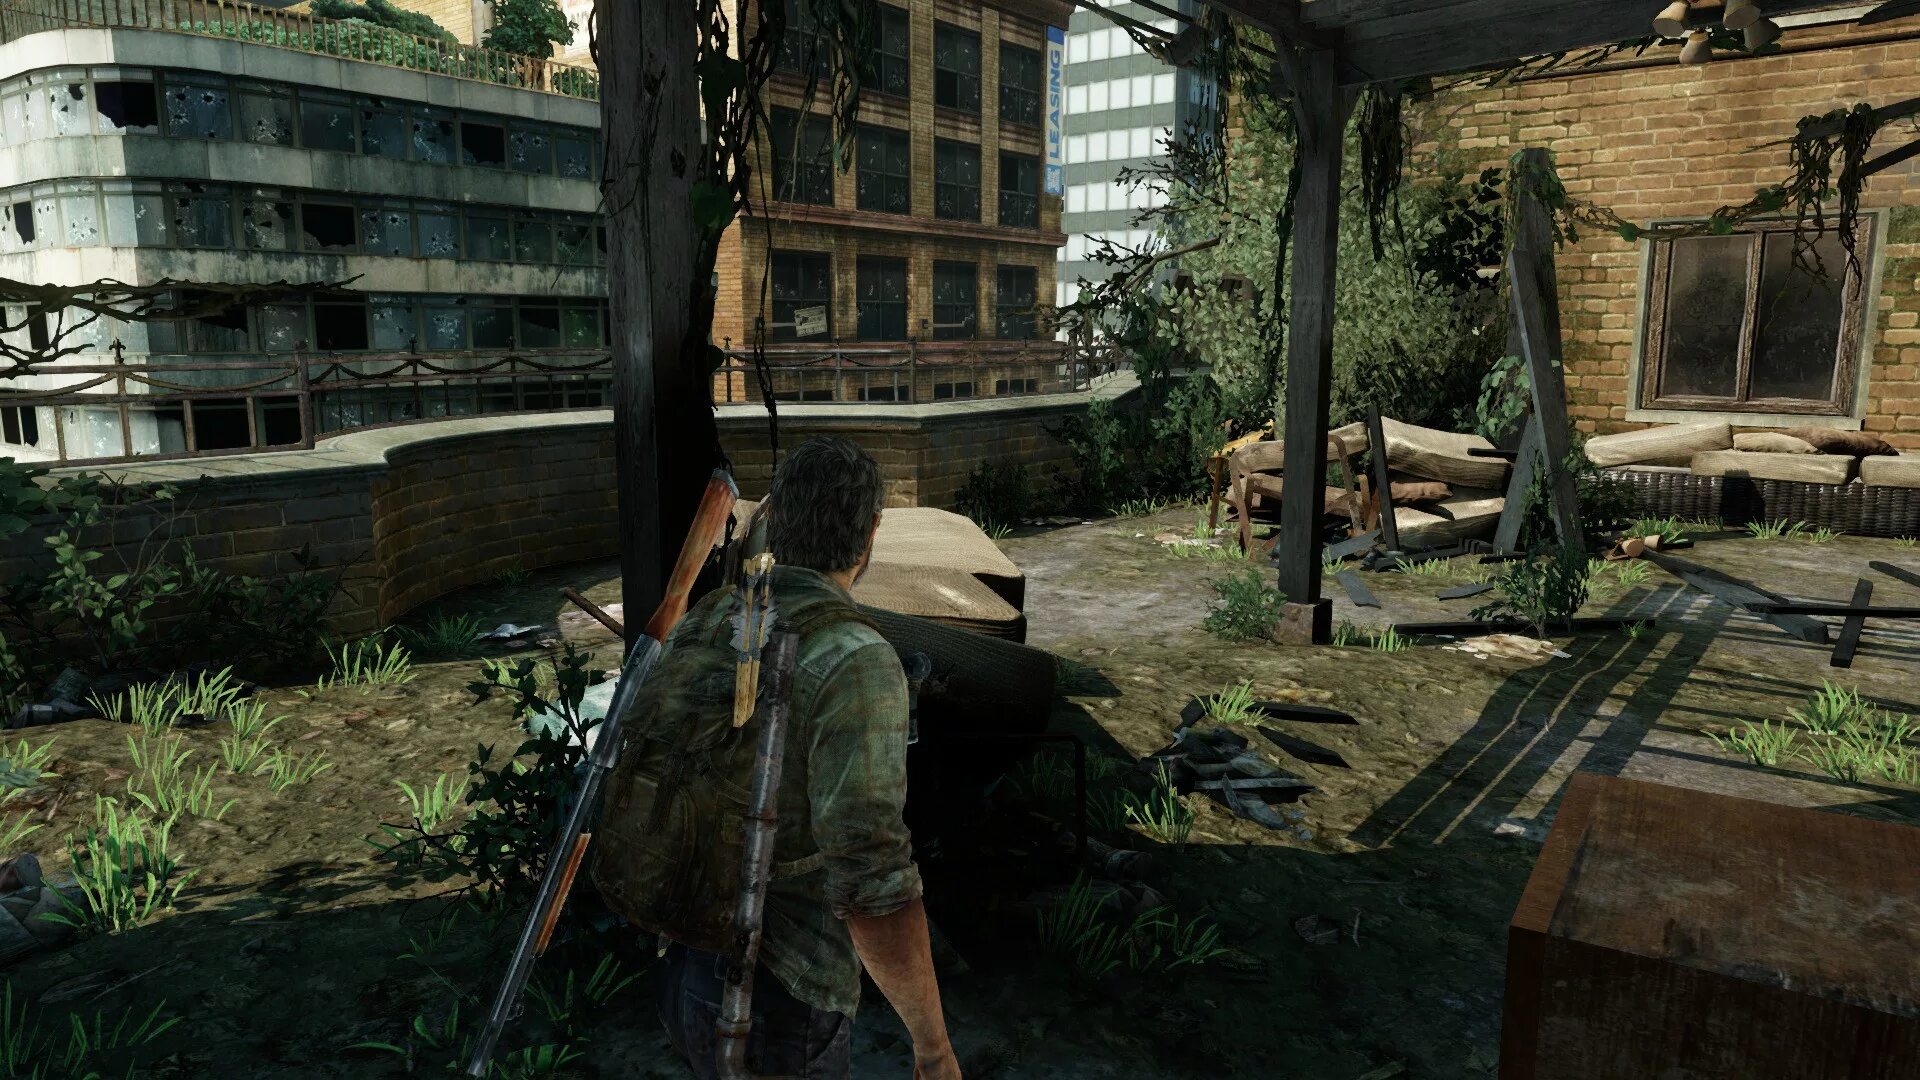 The last of us 1. The last of us игра ремастер. Ласт оф АС ps3. The last of us игра на ps4. Ласт оф ас 2 пк дата выхода